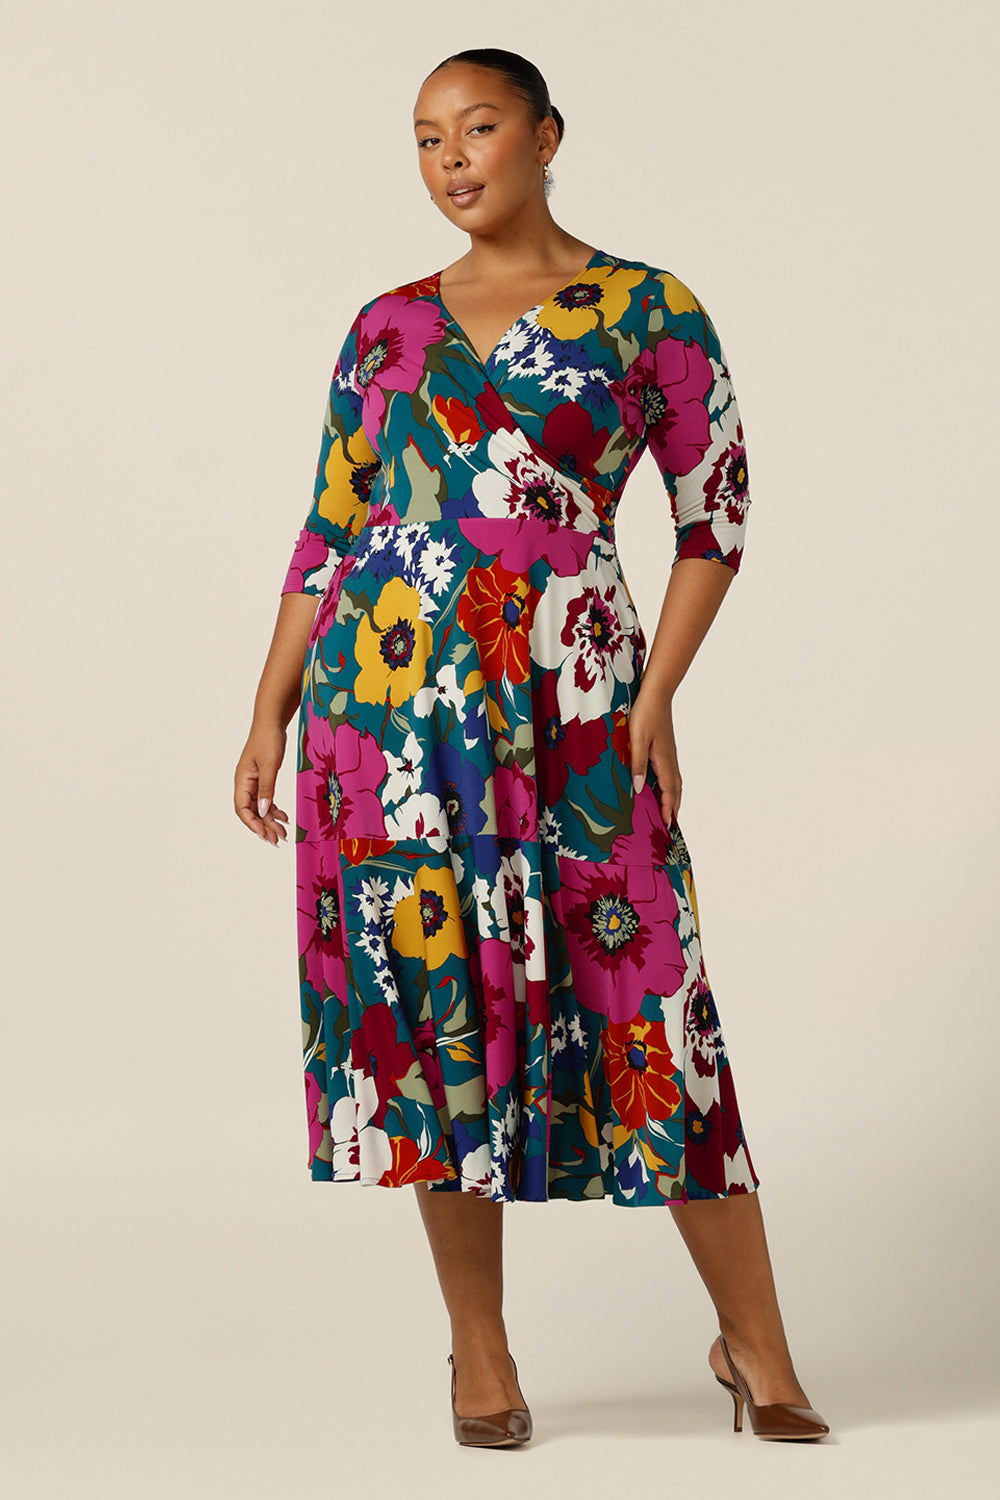 A size 18, plus size woman wears a fixed wrap dress in printed jersey. Made in Australia by  Australian and New Zealand fashion brand, L&F this jersey wrap dress is reversible and can be worn with a boat neckline. A dress for work or occasion wear, shop now in sizes 8-24.